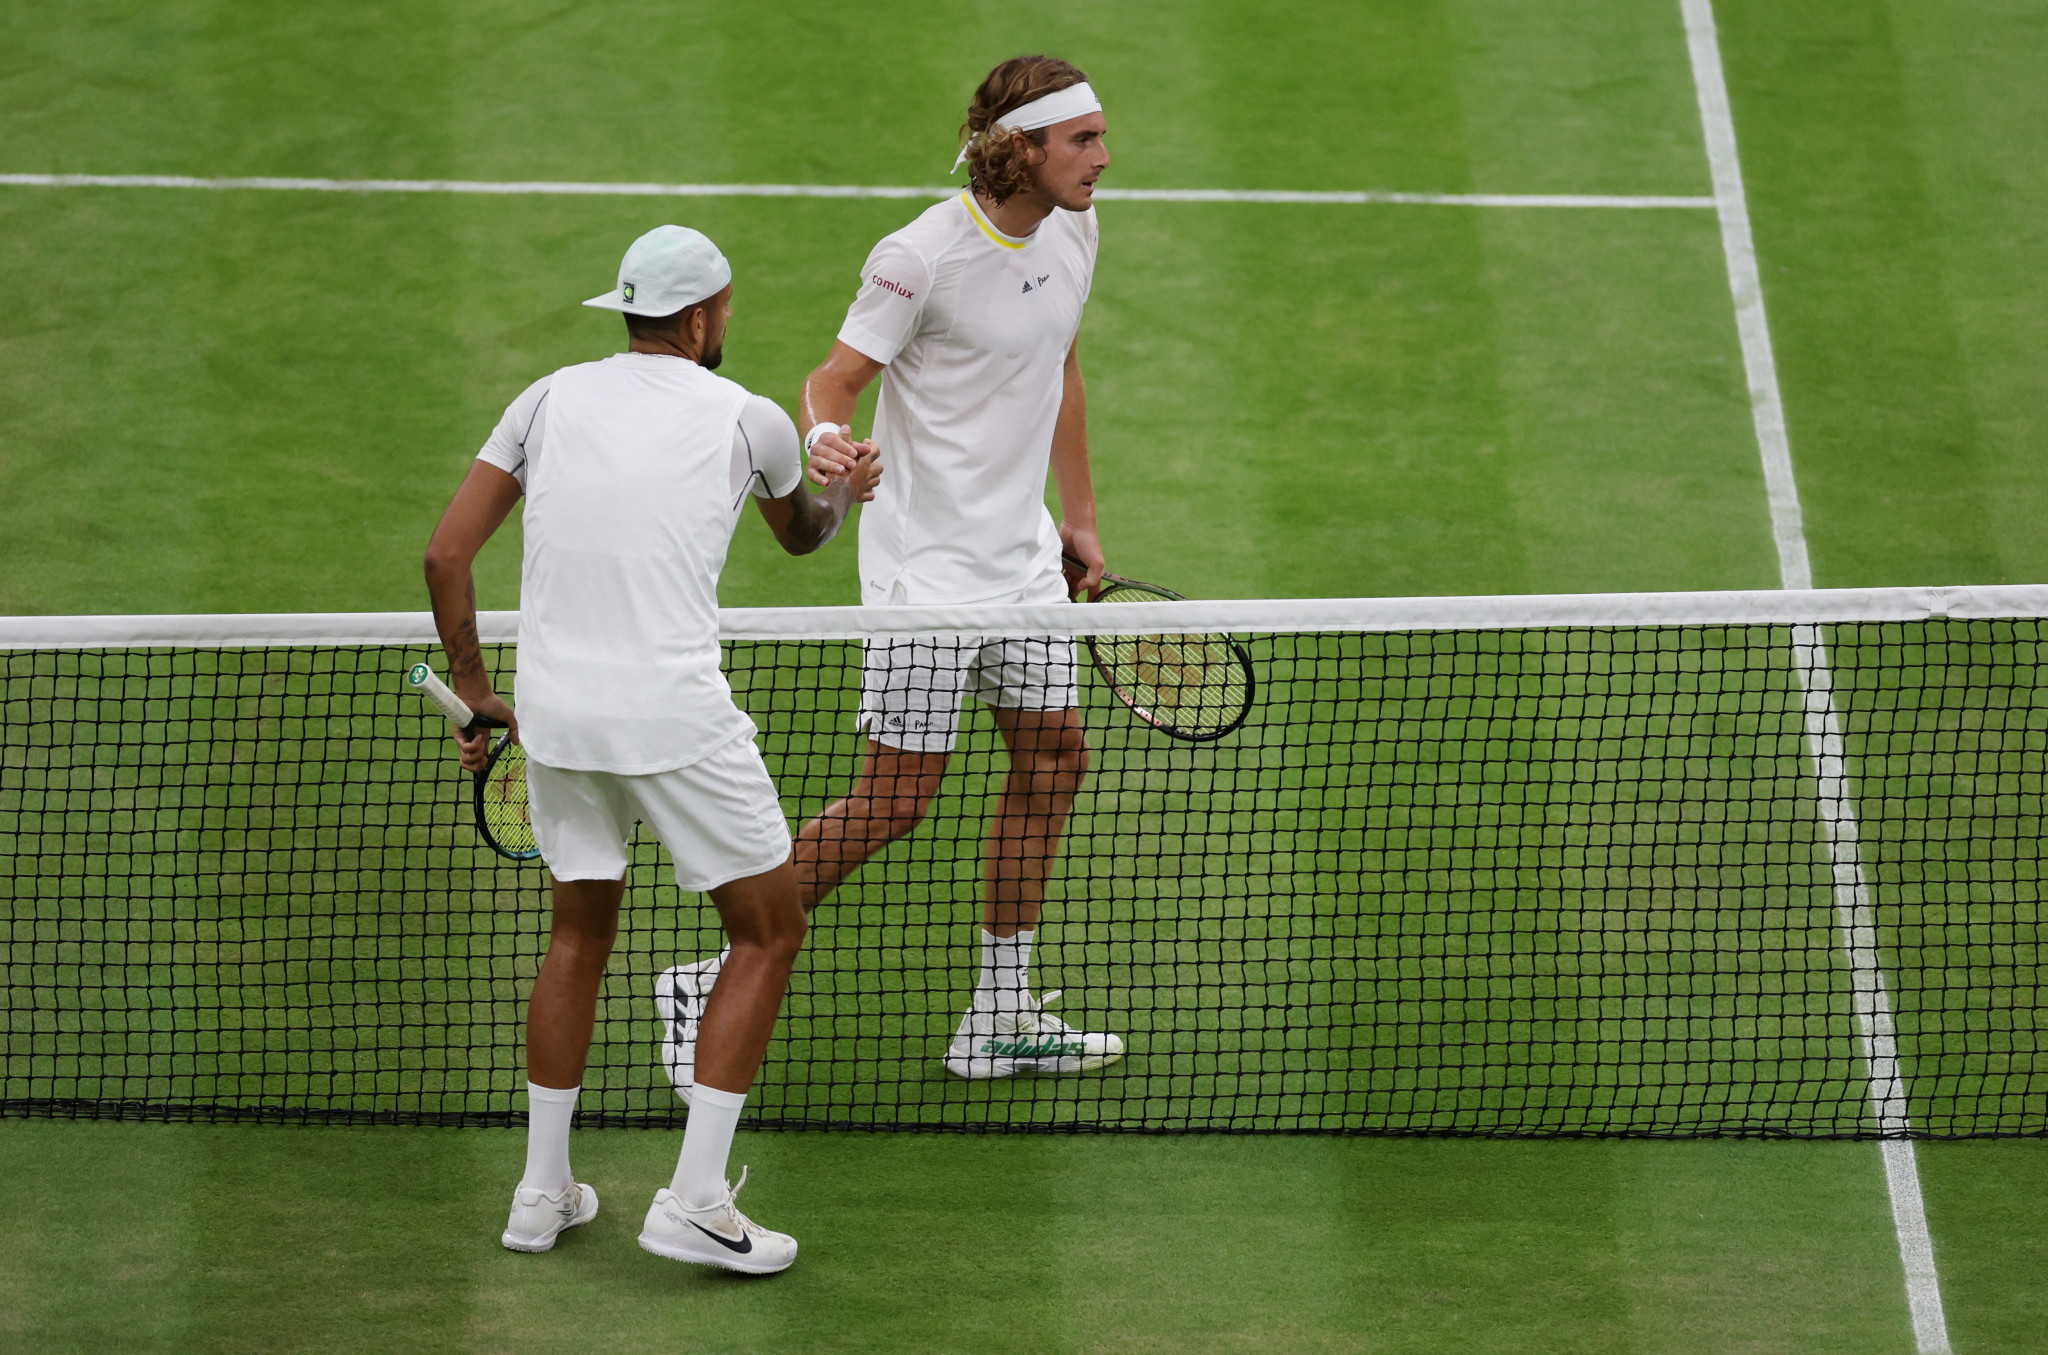 Nick Kyrgios and Stefanos Tsitsipas have been fined for their actions during their third-round encounter at Wimbledon ©Getty Images